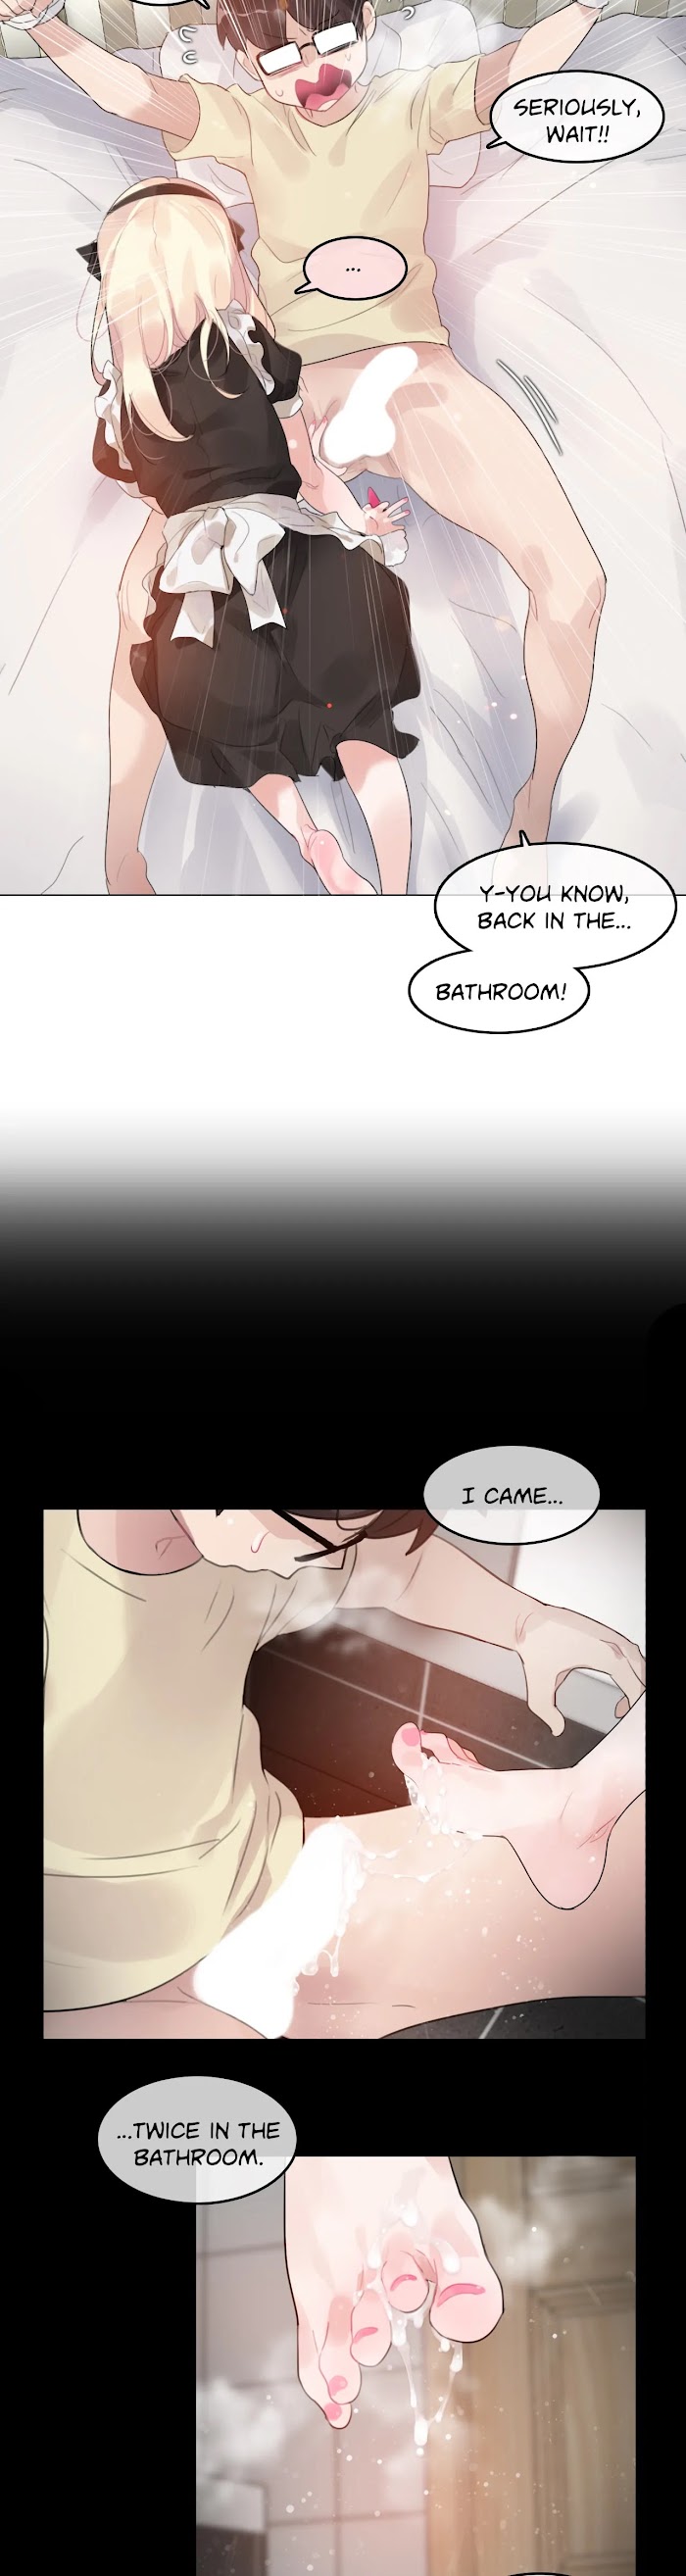 A Pervert's Daily Life Chapter 70 : Side Story 12 - Picture 2